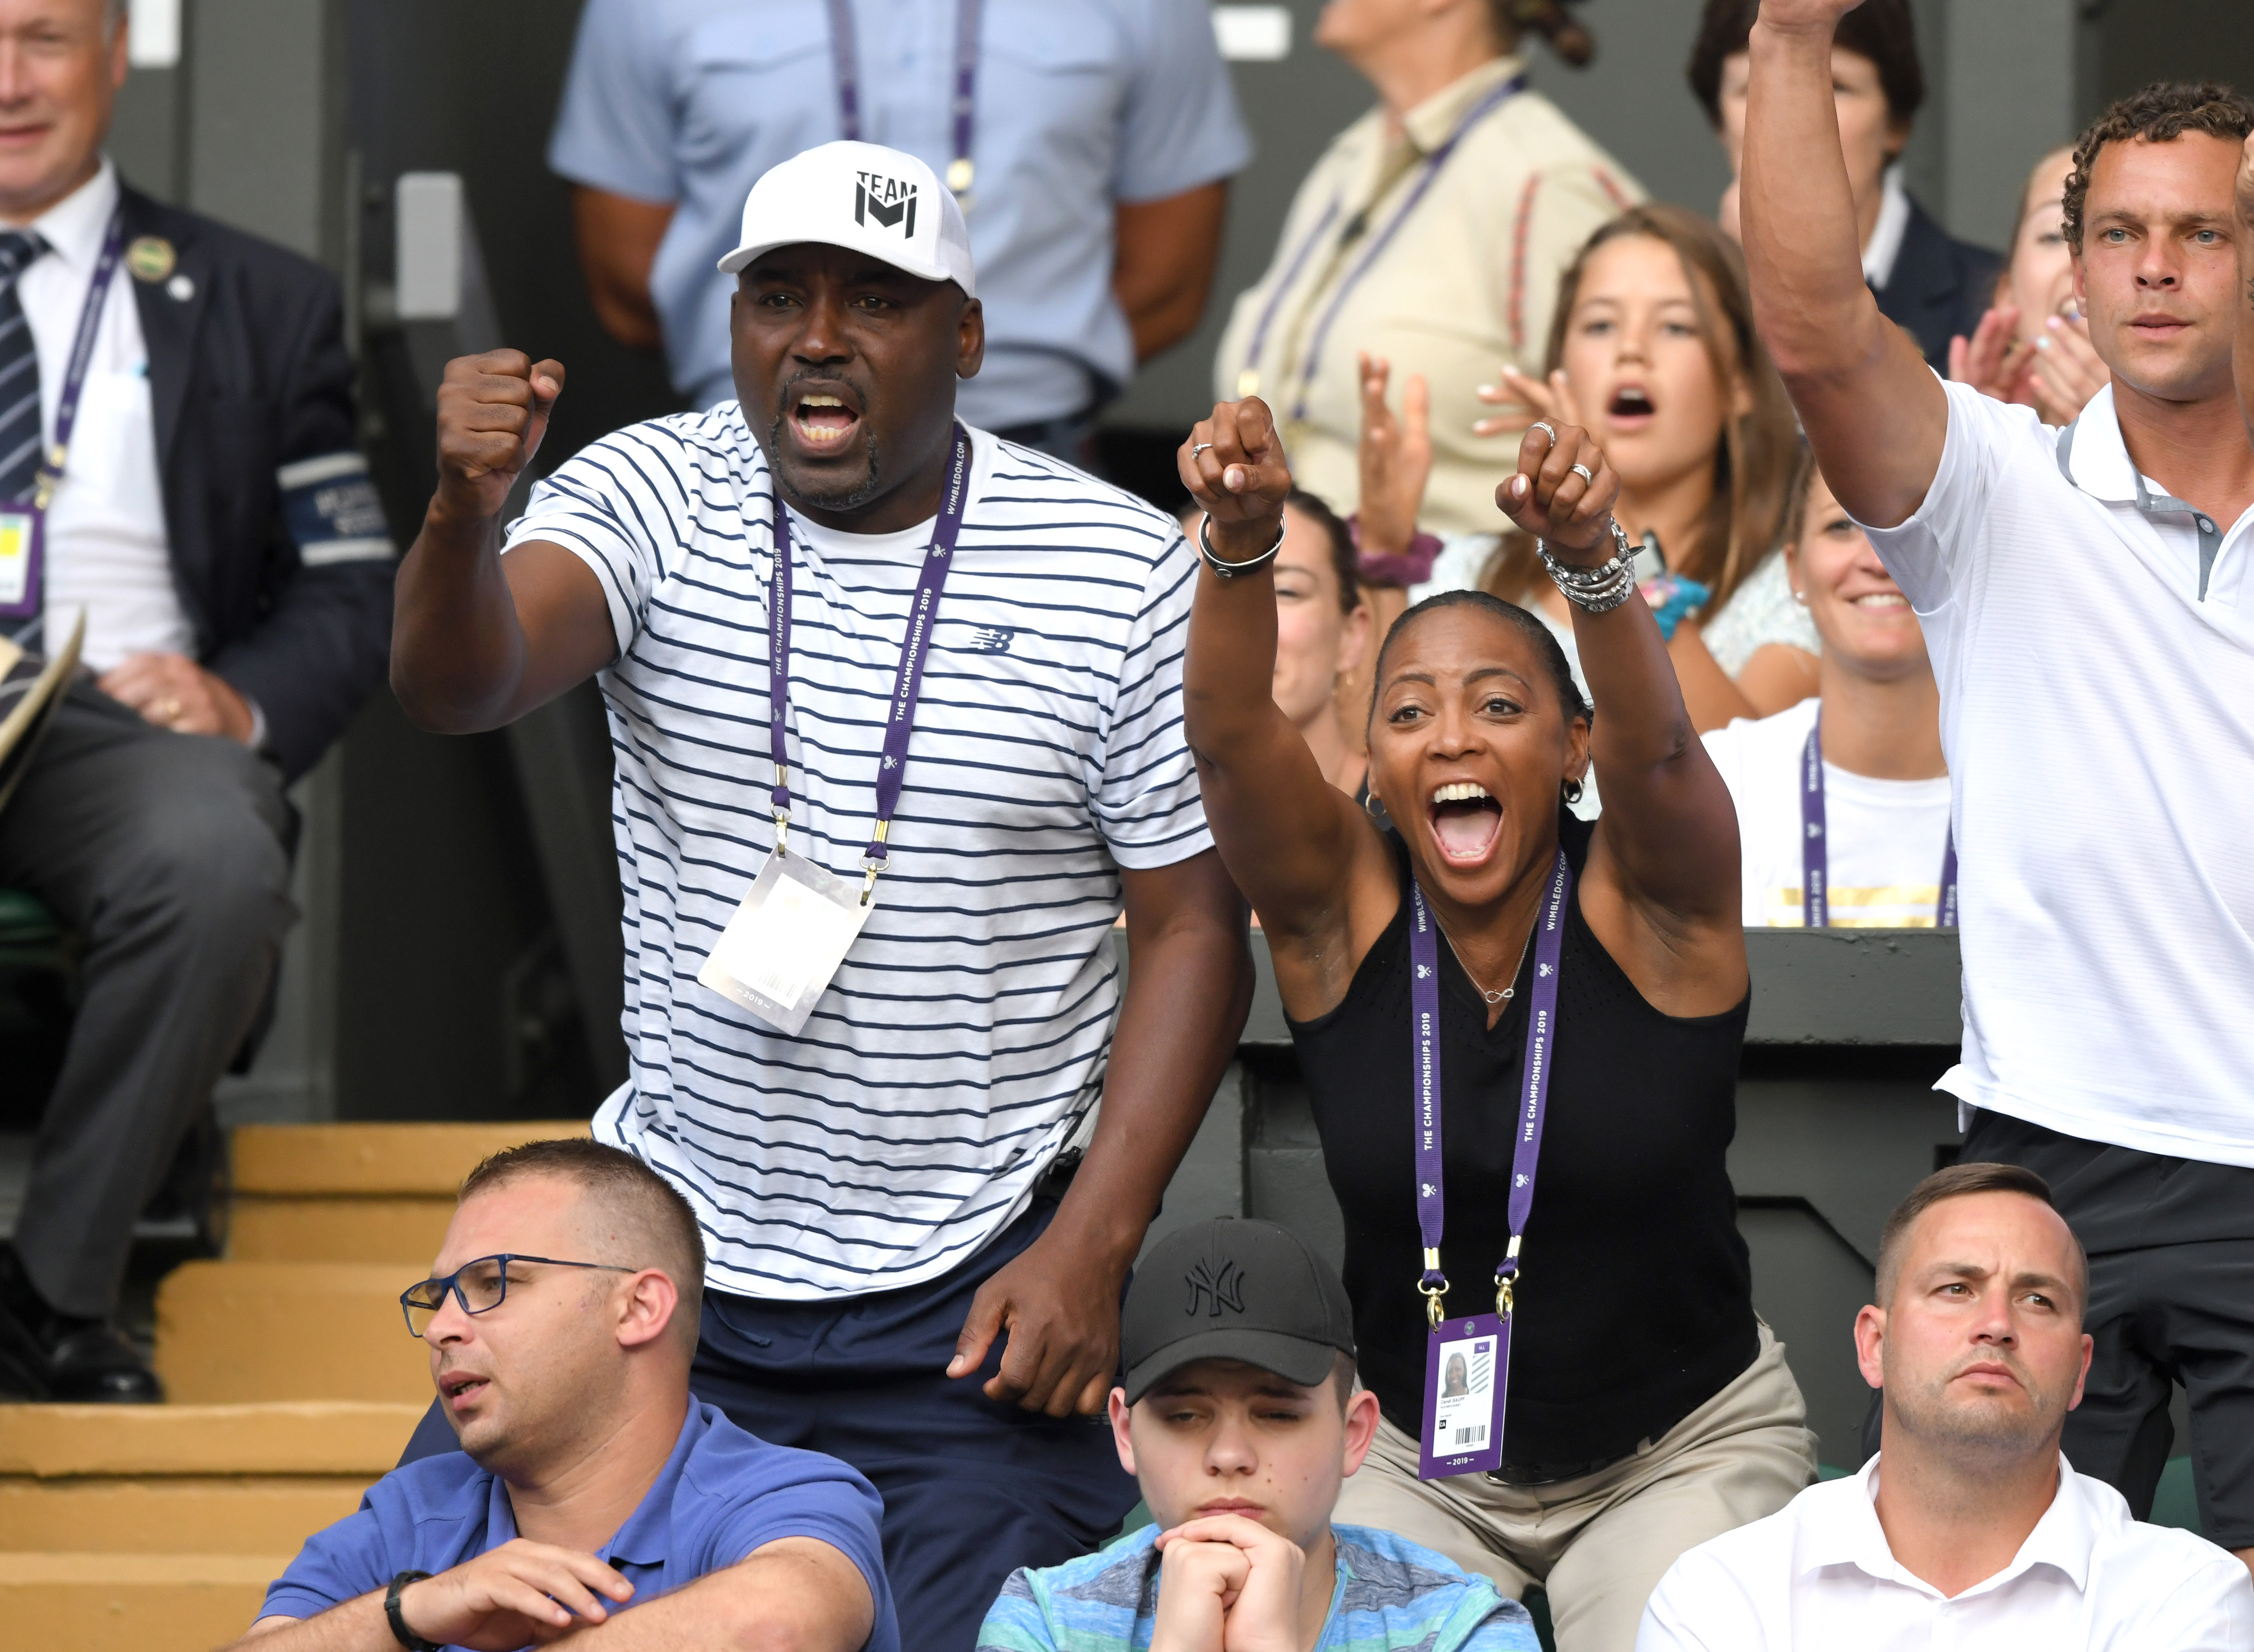 Corey Gauff and Candi Gauff attend day five of the Wimbledon Tennis Championships at All England Lawn Tennis and Croquet Club on July 5, 2019, in London, England. | Source: Getty Images